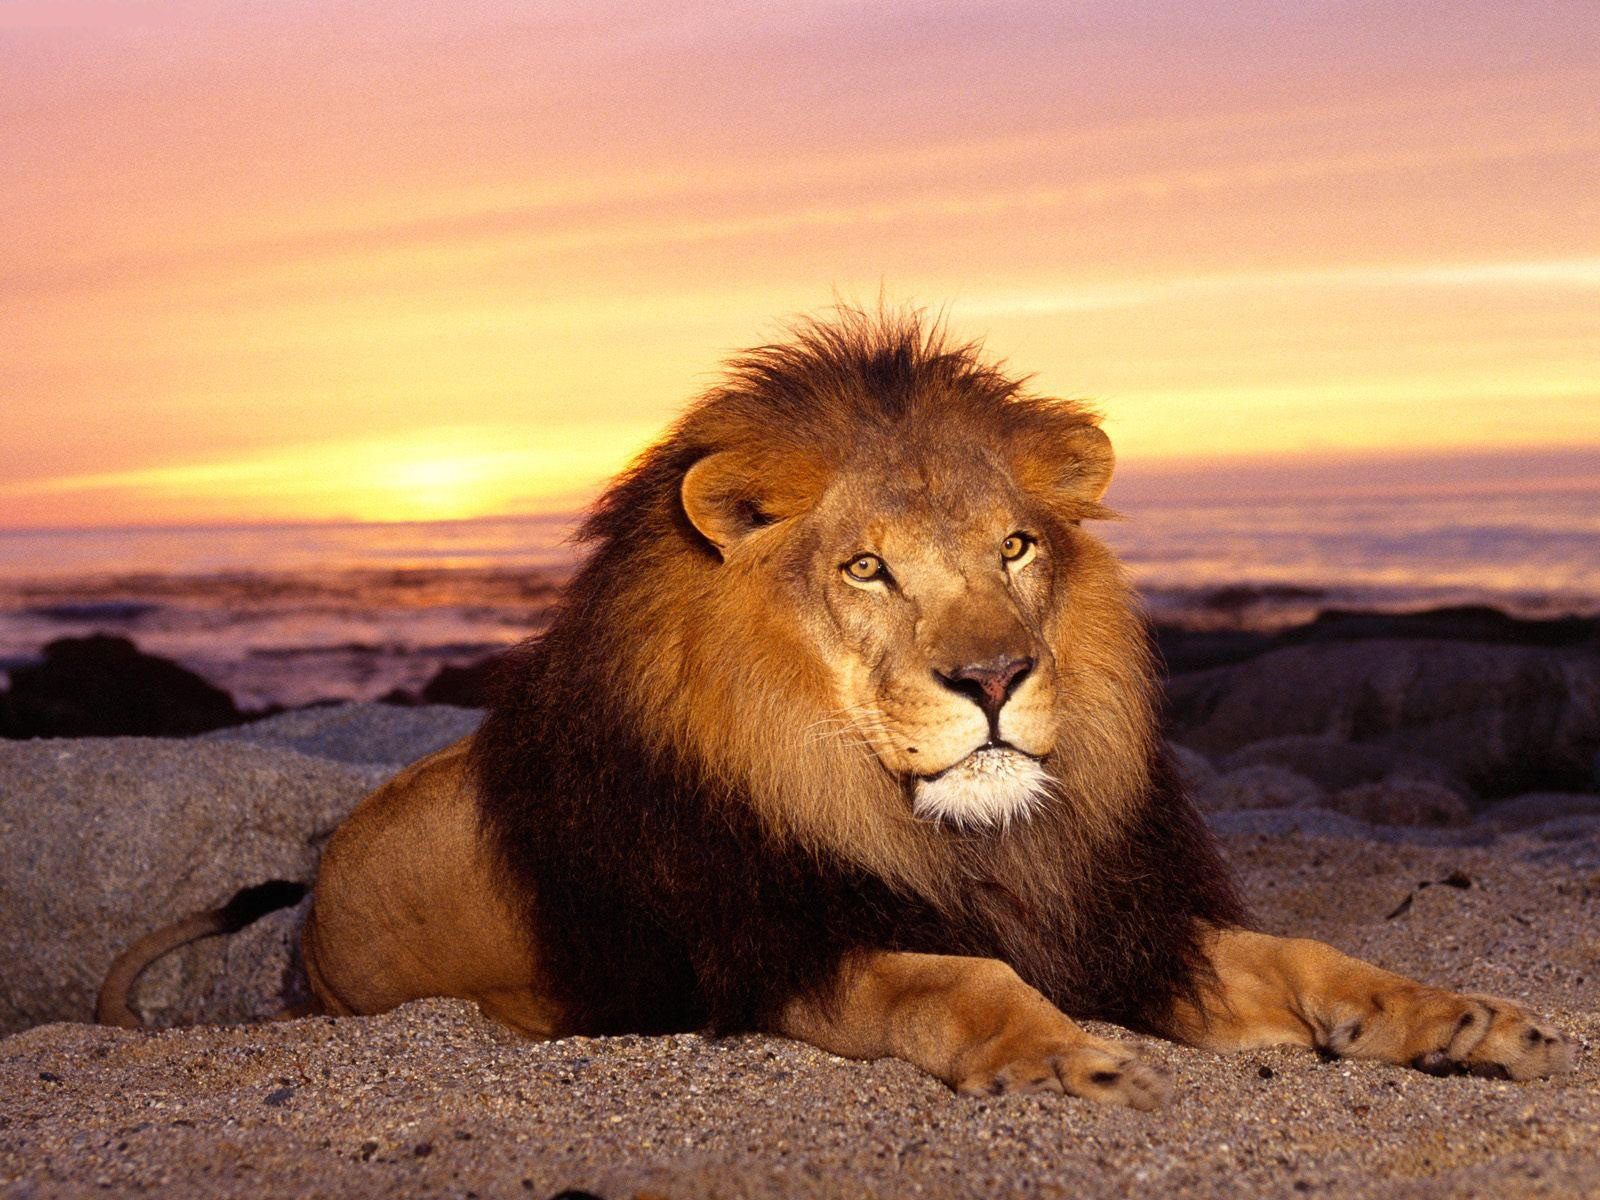 Top 10 Interesting Facts About Lions